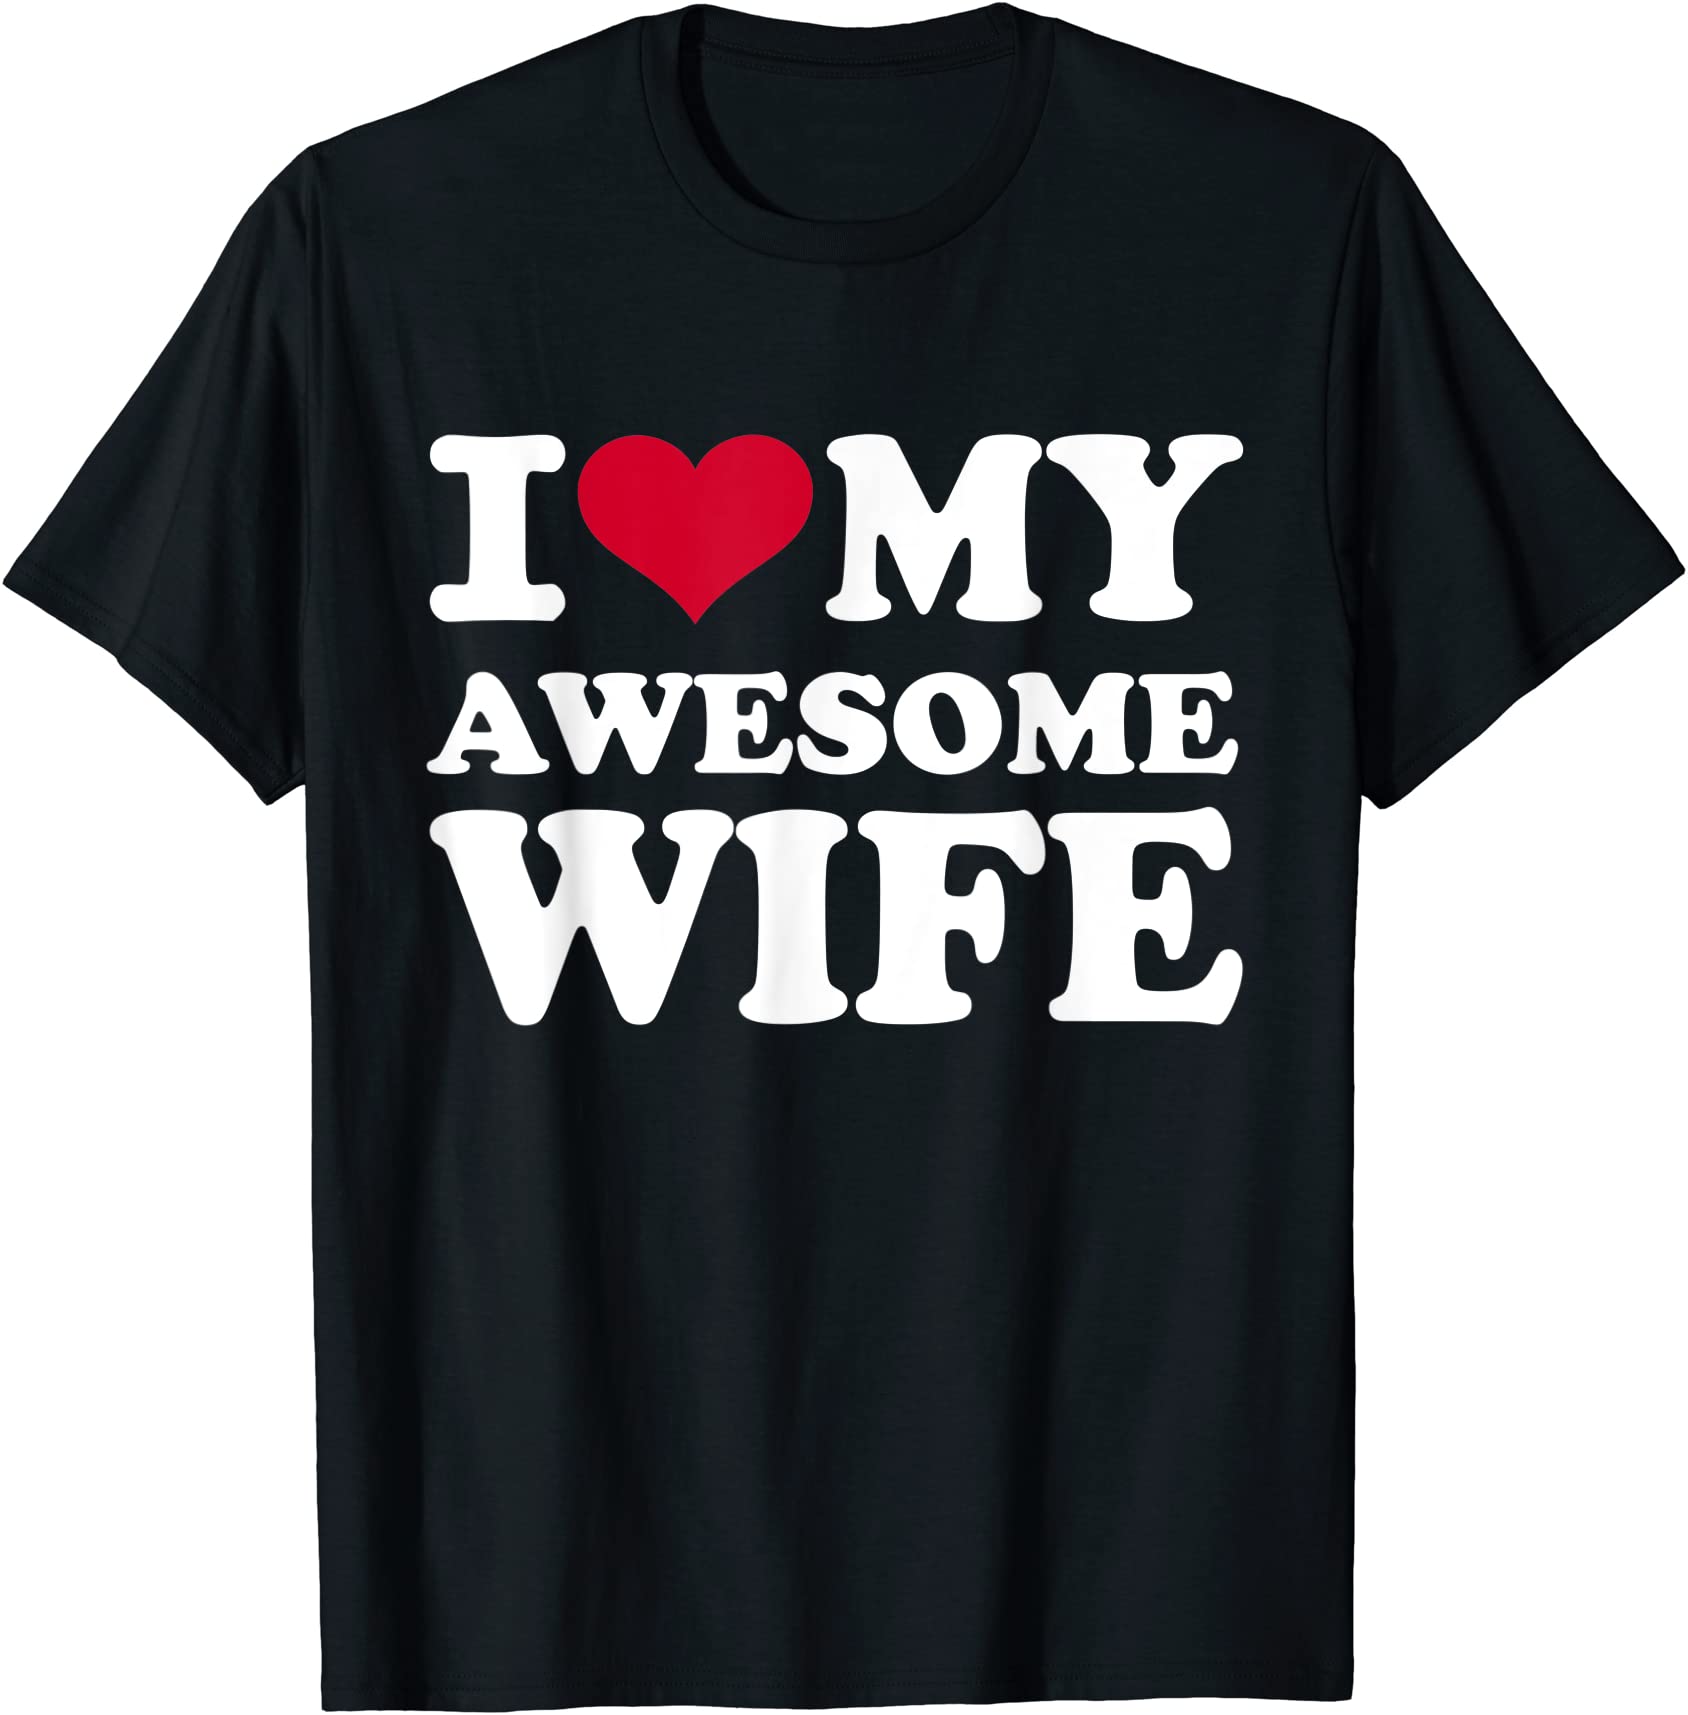 mens i love my awesome wife t shirt men - Buy t-shirt designs